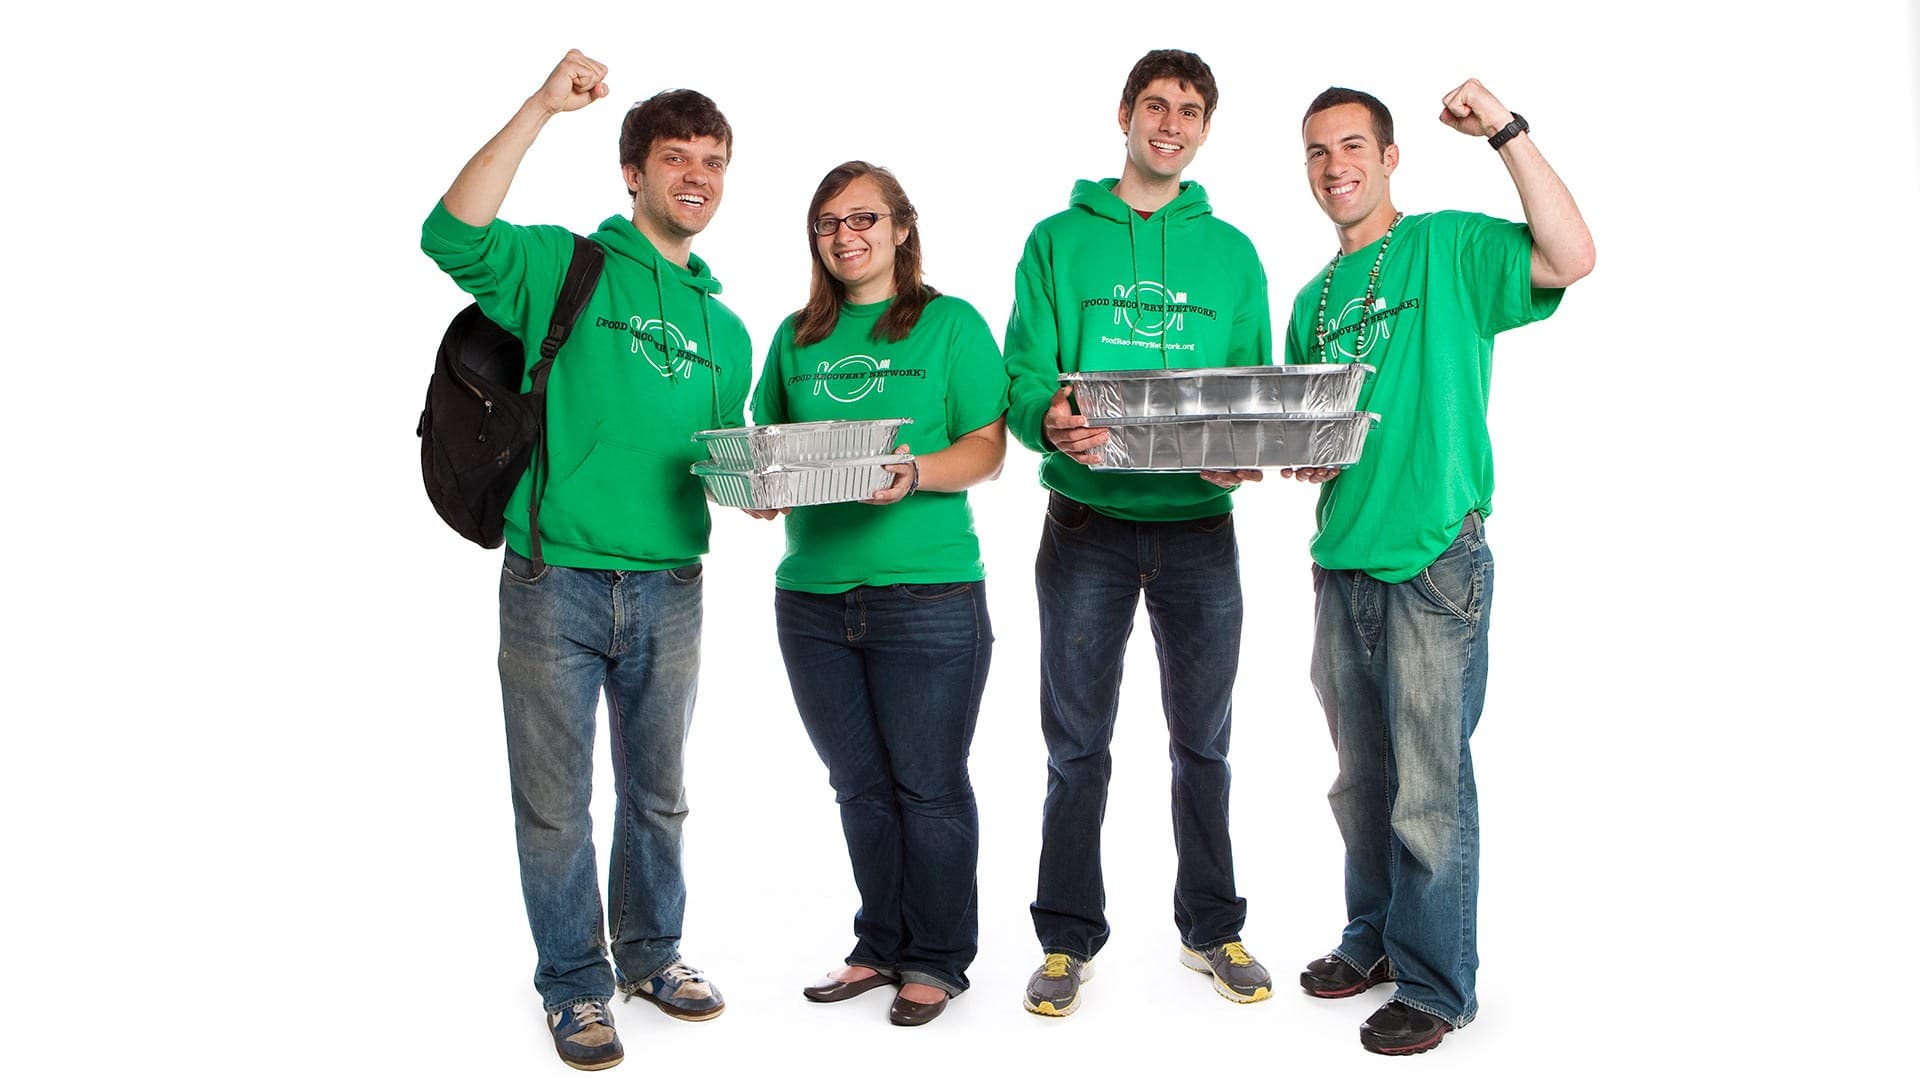 four students from Food Recovery Network cheer while wearing matching green shirts and holding trays of food